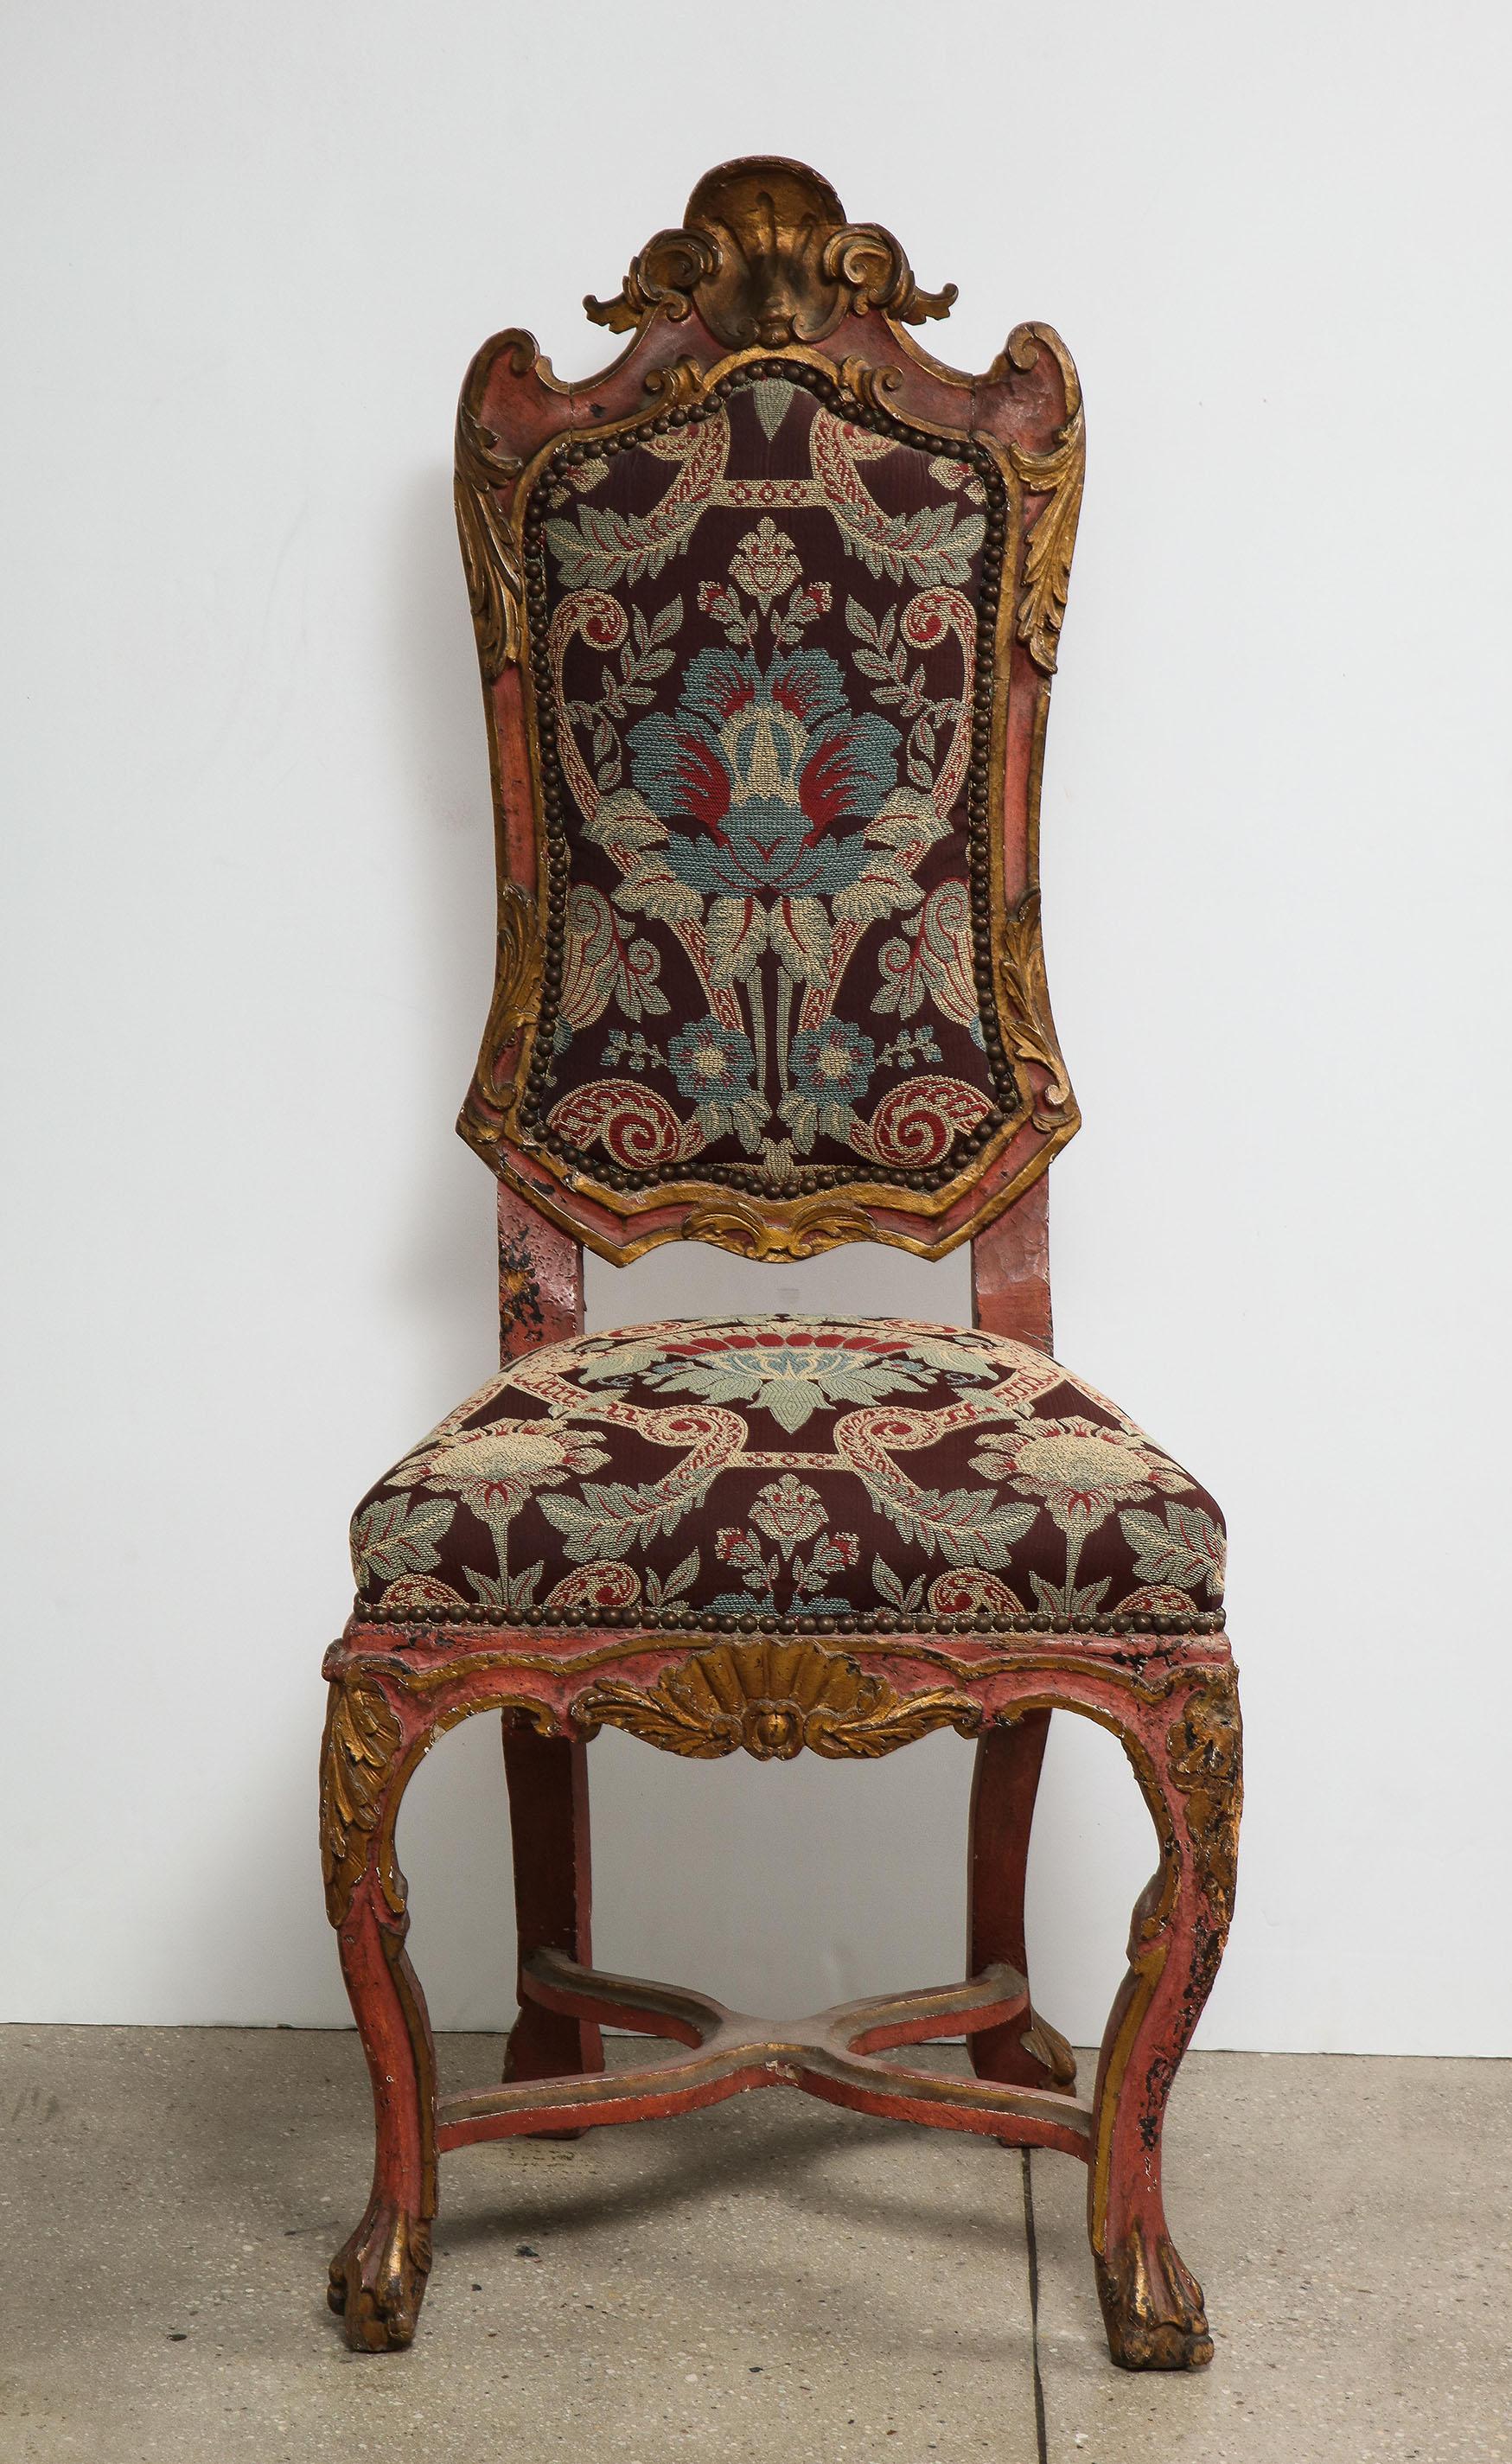 Italian painted and gilt Rococo chair

The painted and gilt all over intricately carved Rococo chair, with an inset upholstered back and seat, four cabriole legs with an X-form stretcher.